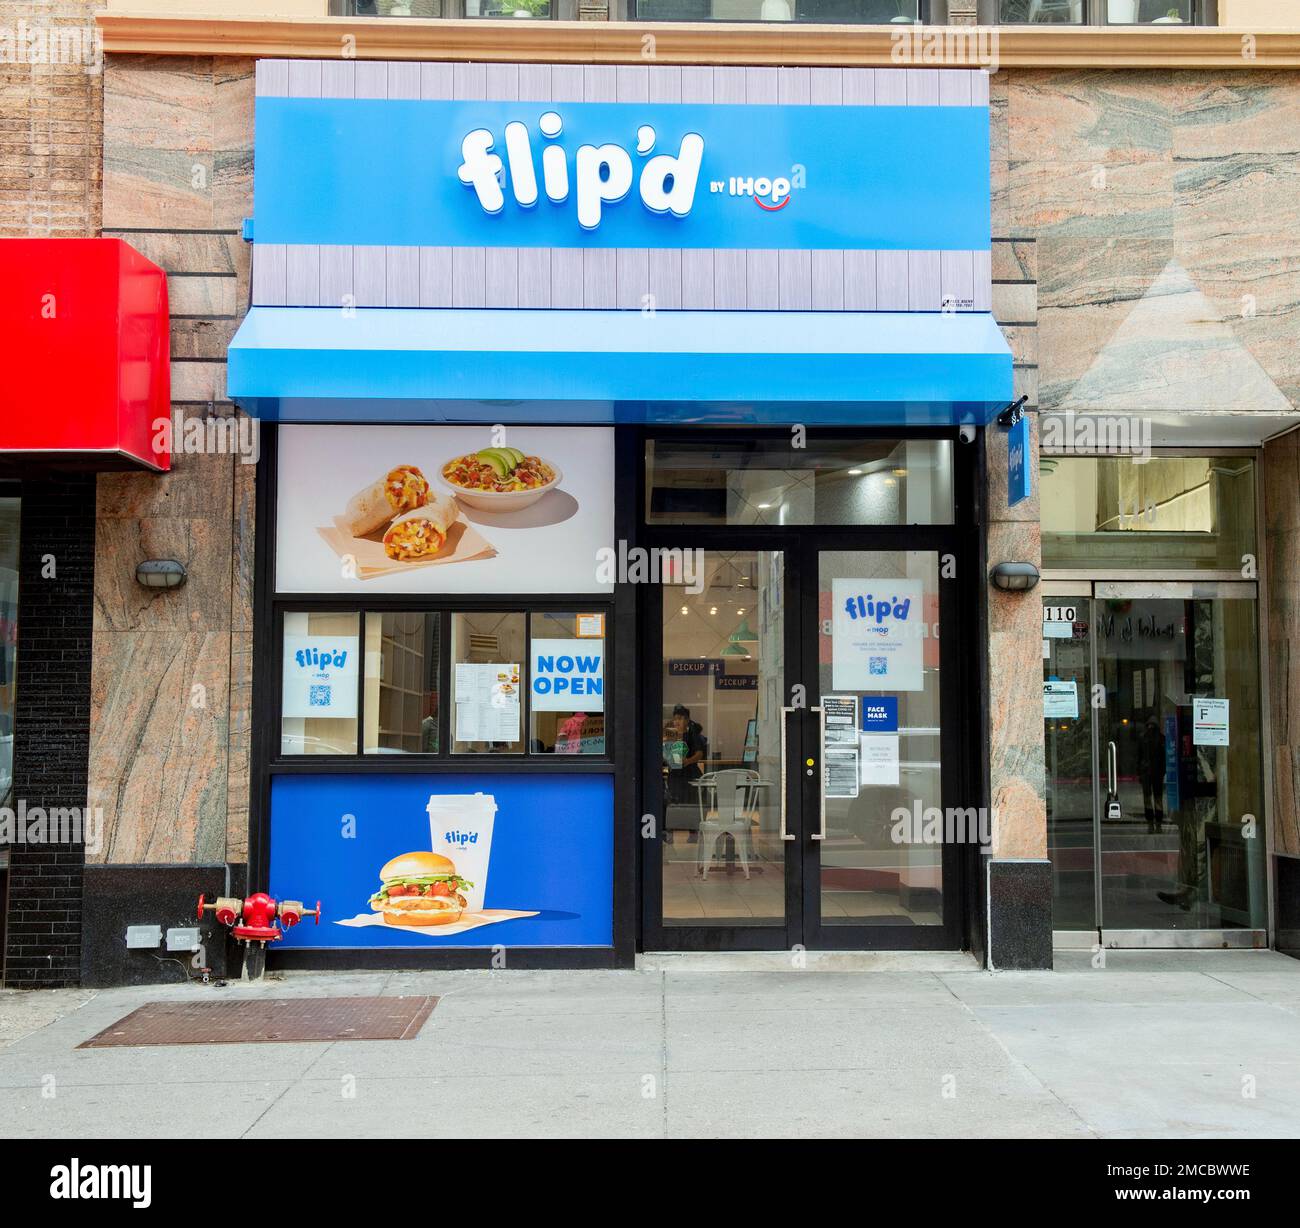 Flip'd by IHOP, 110 E 23rd St, New York, NYC storefront photo of a